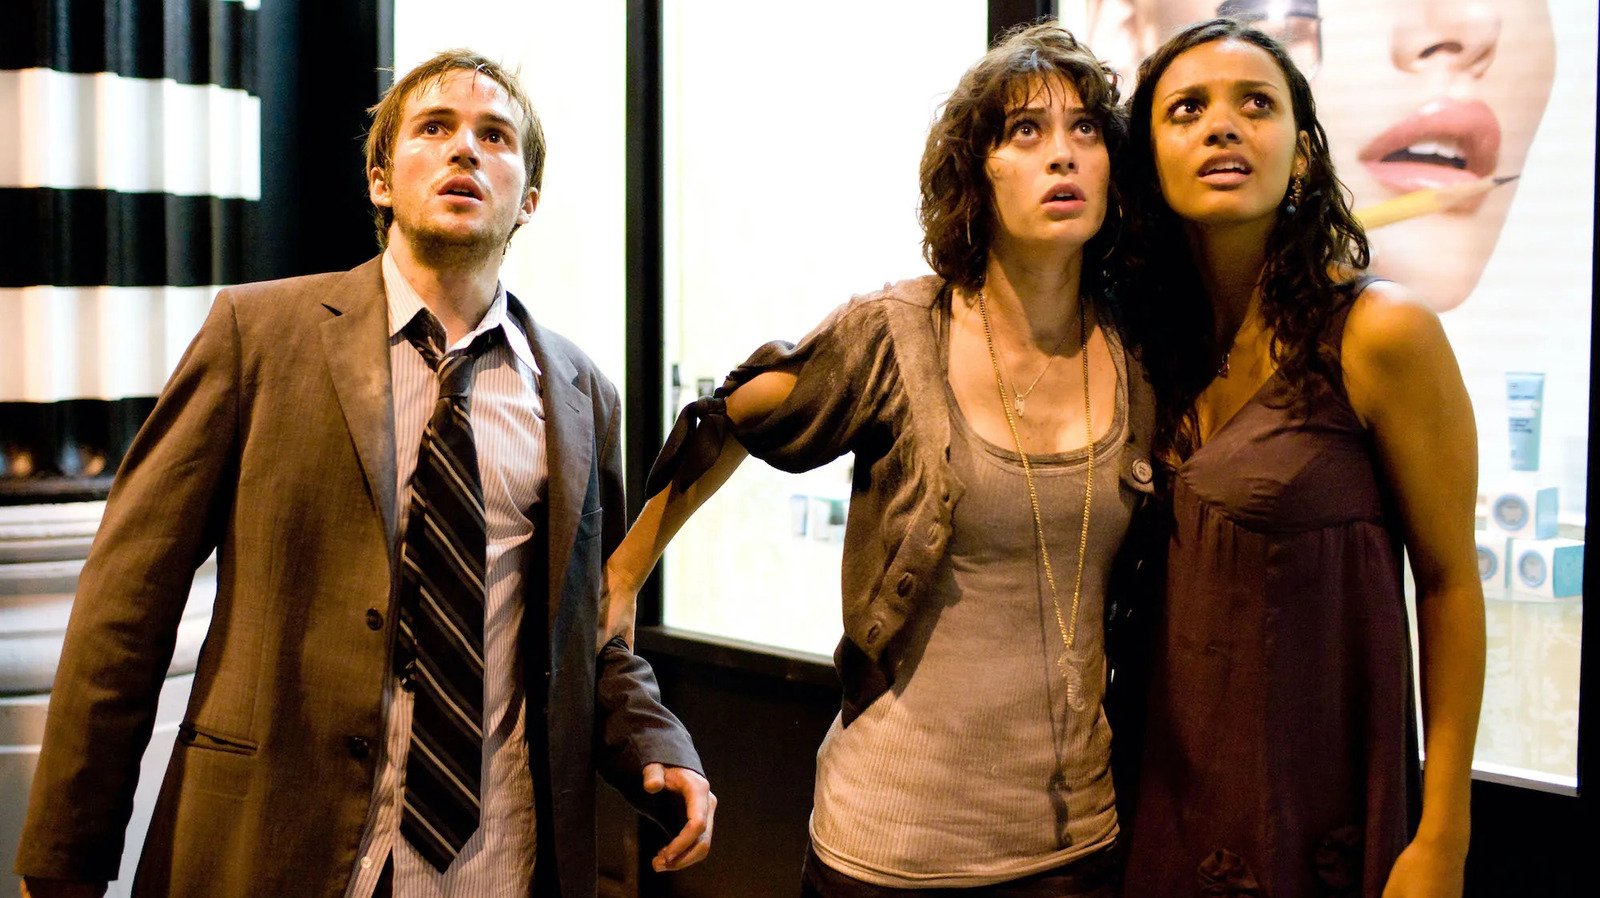 There's A Scientific Reason Cloverfield Made You Sick To Your Stomach